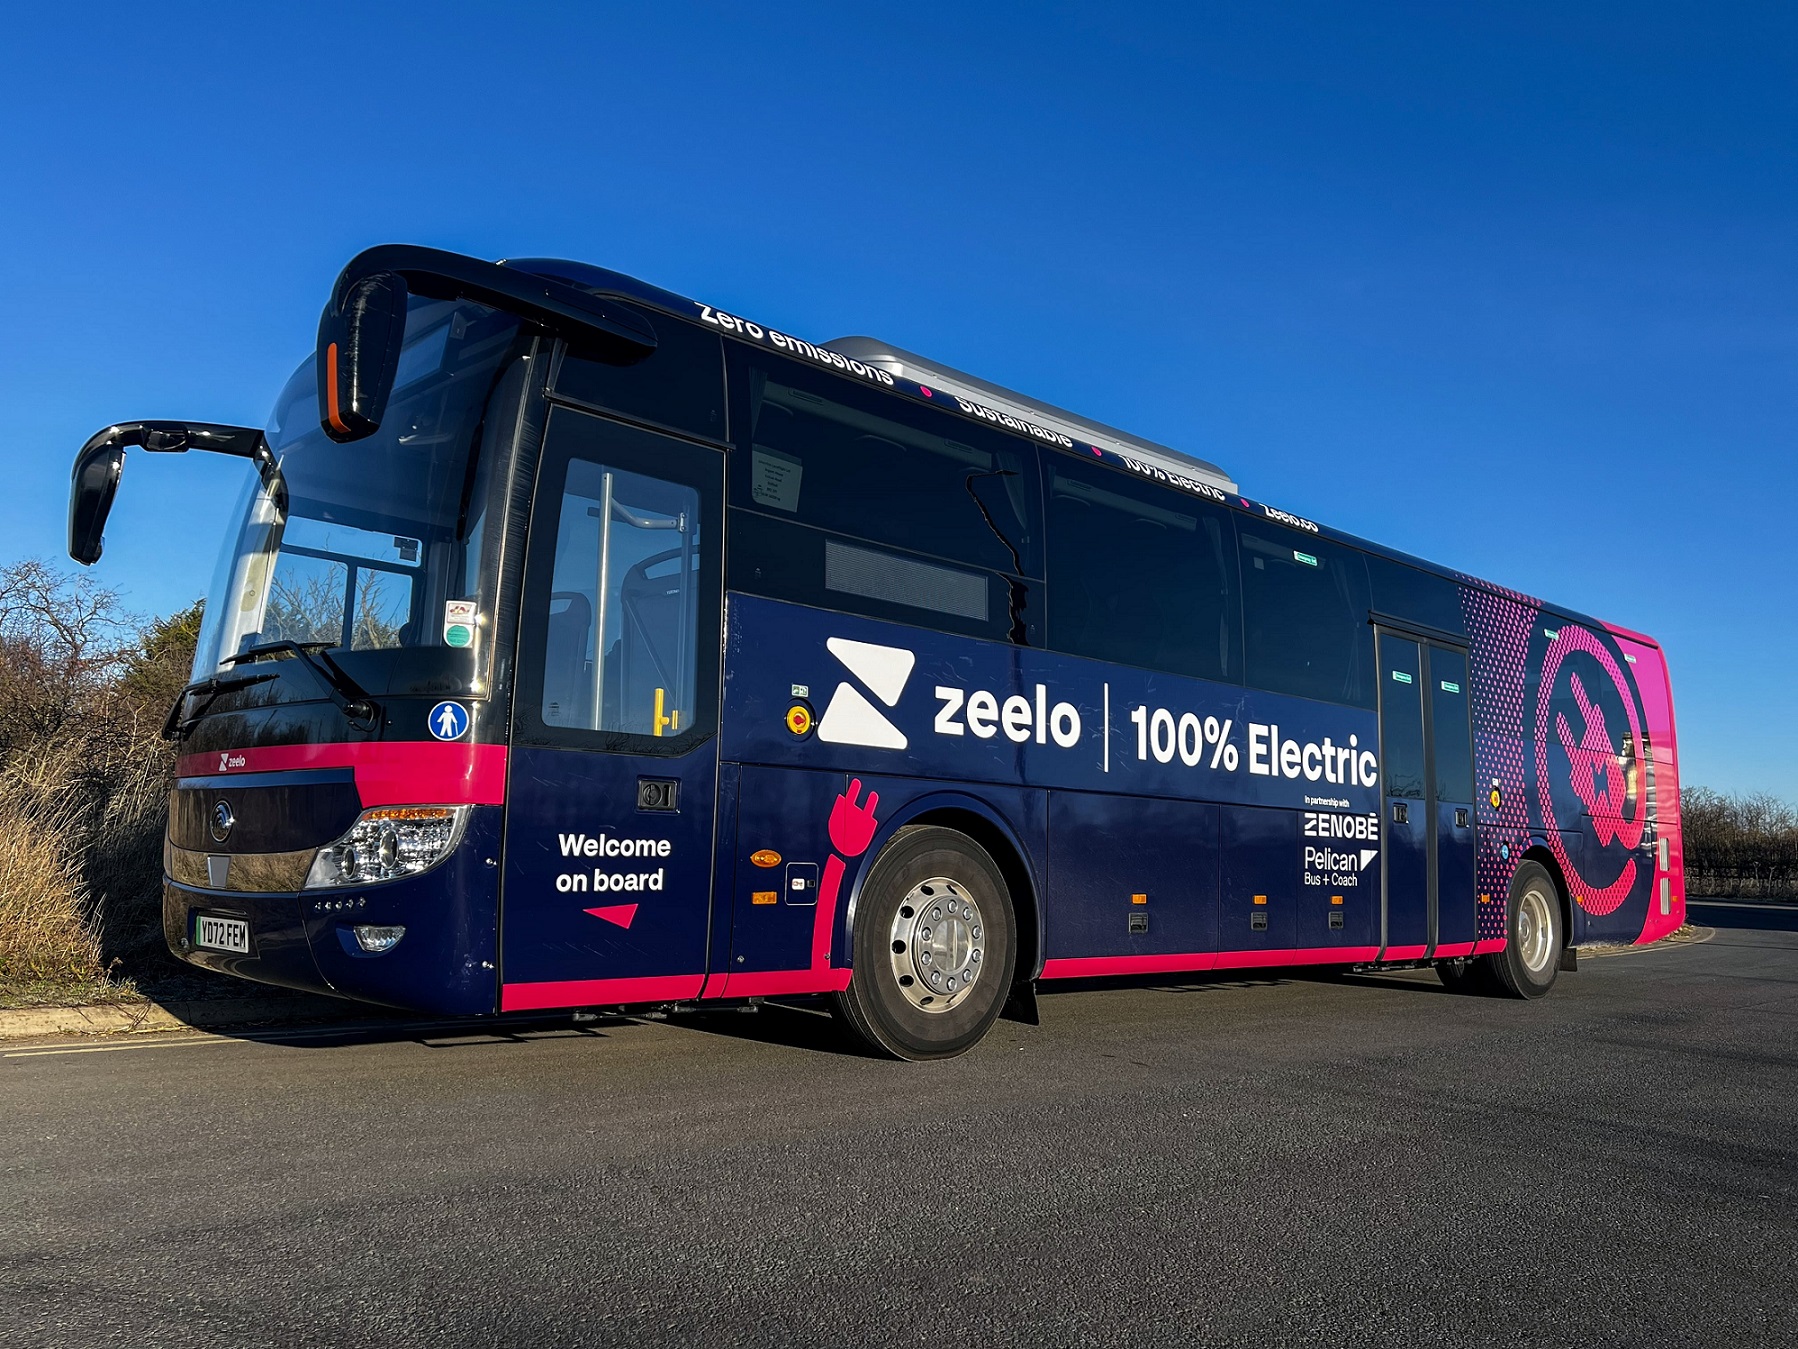 Zeelo looks to growth in home to school and corporate after Kura deal